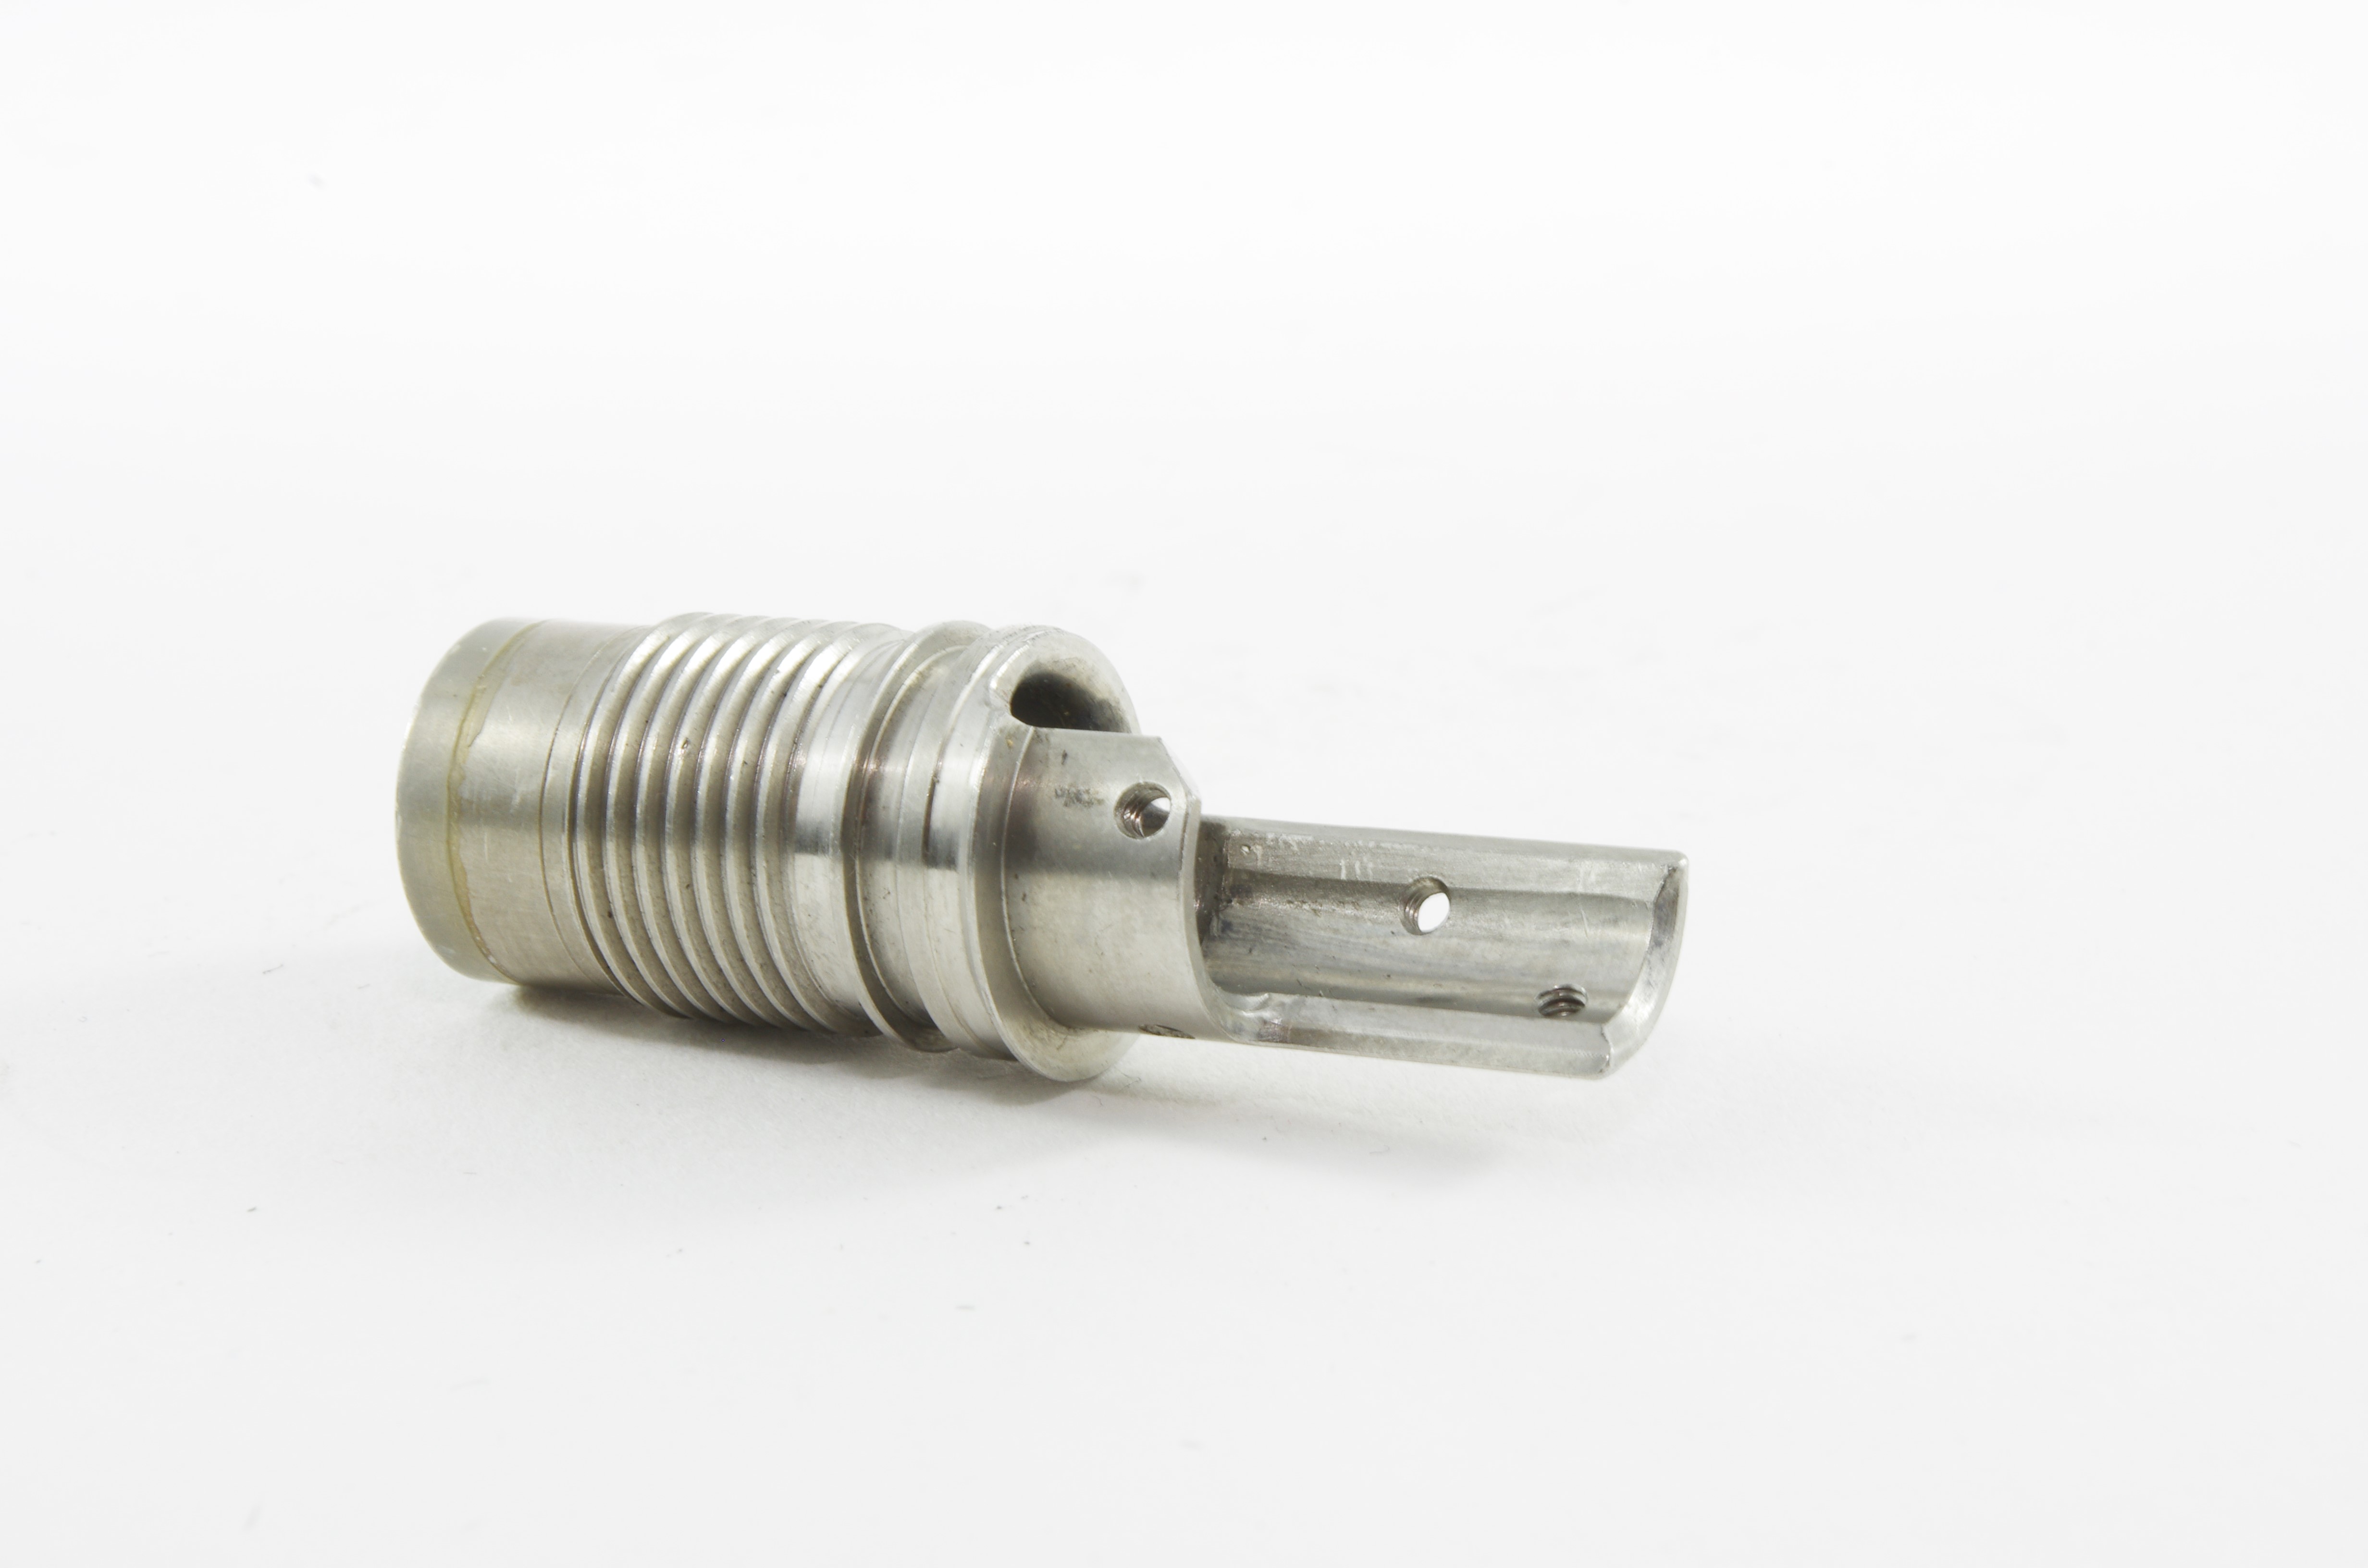 OEM Light Guide Tube Proximal End Fitting - 100, 130 Series